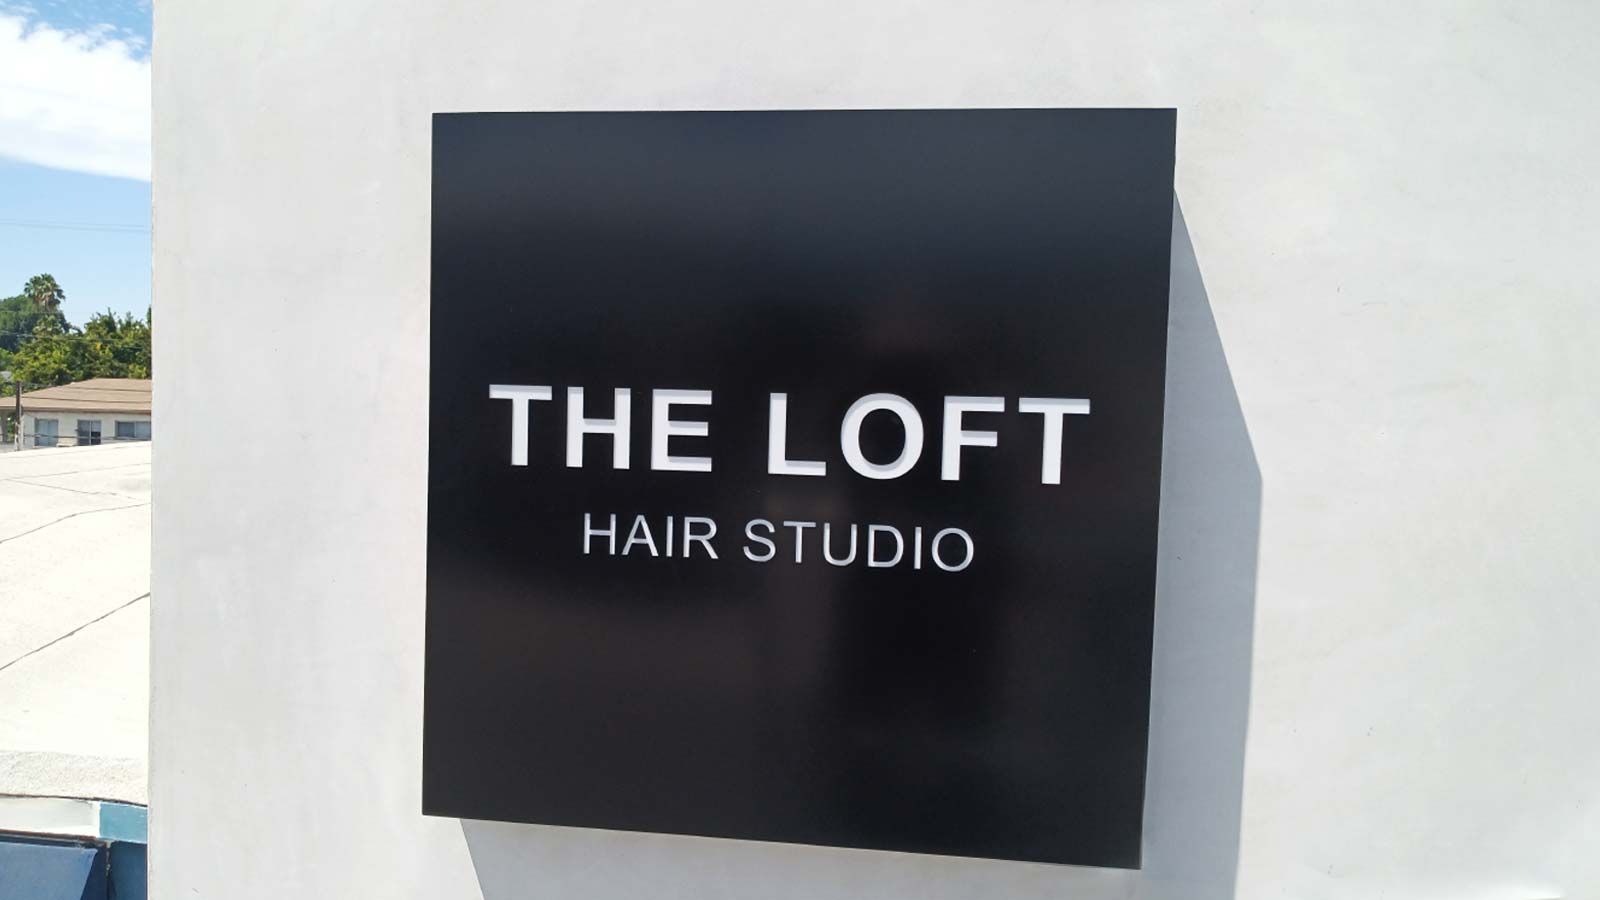 The Loft Hair Studio wall-mounted light up sign